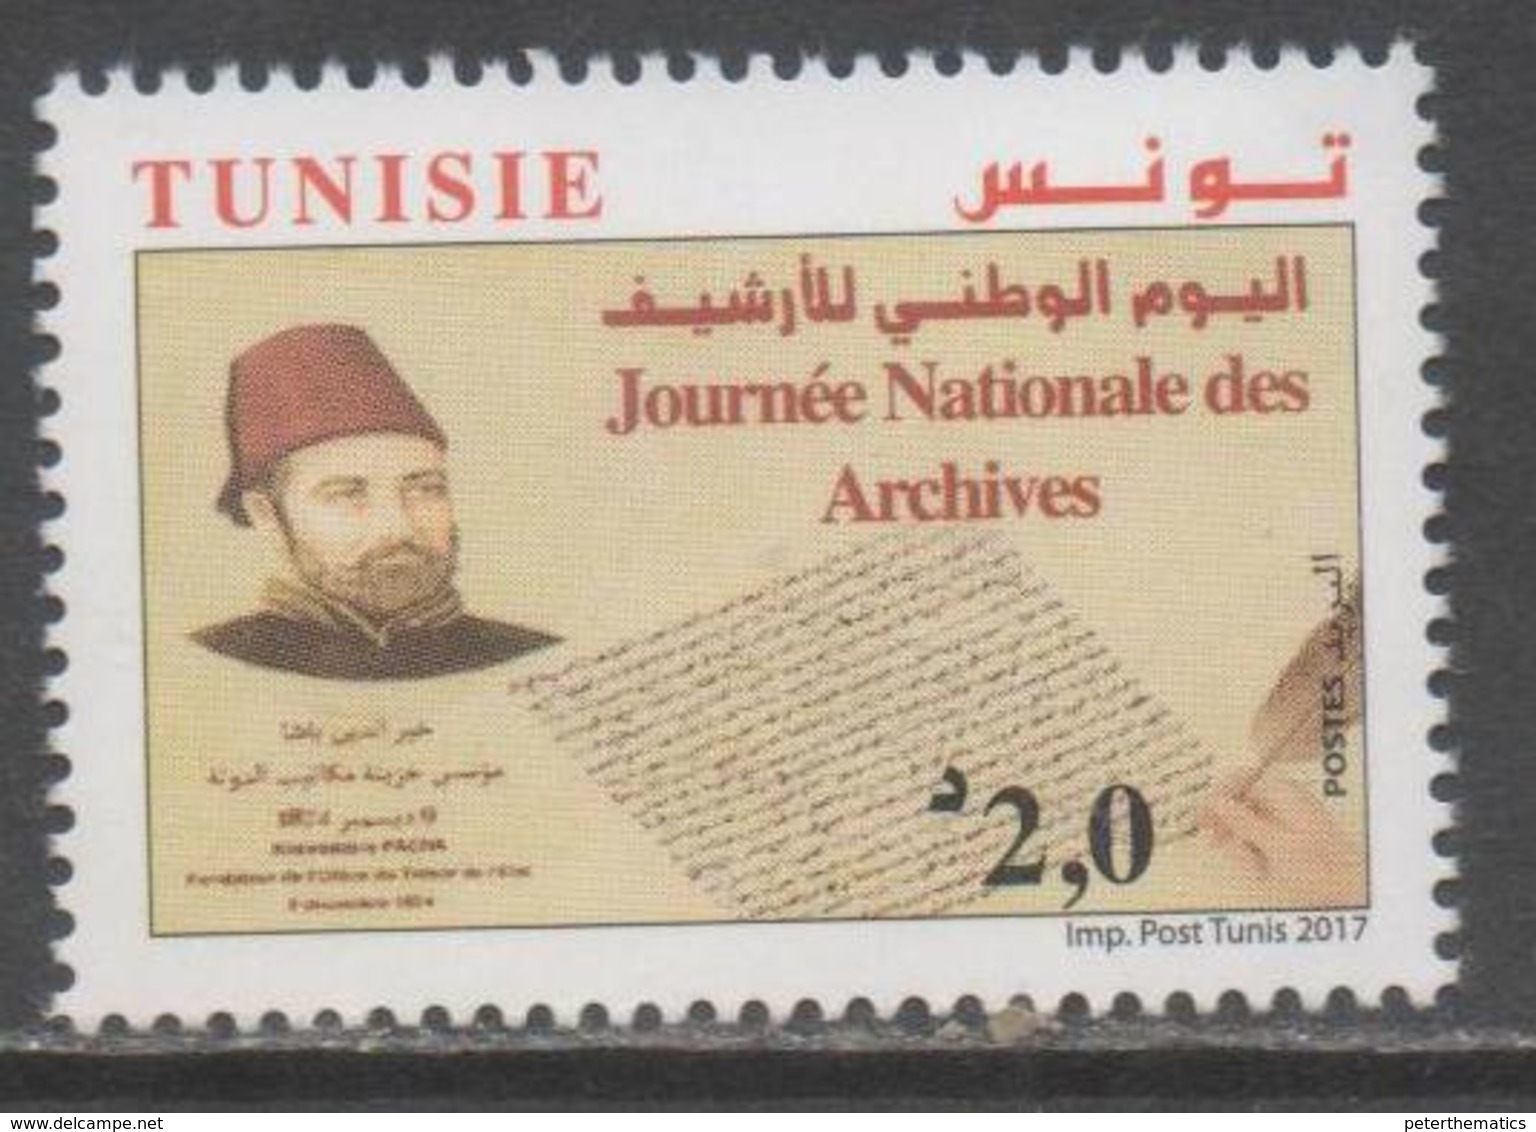 TUNISIA , 2017, MNH, NATIONAL ARCHIVES DAY, 1v - Unclassified